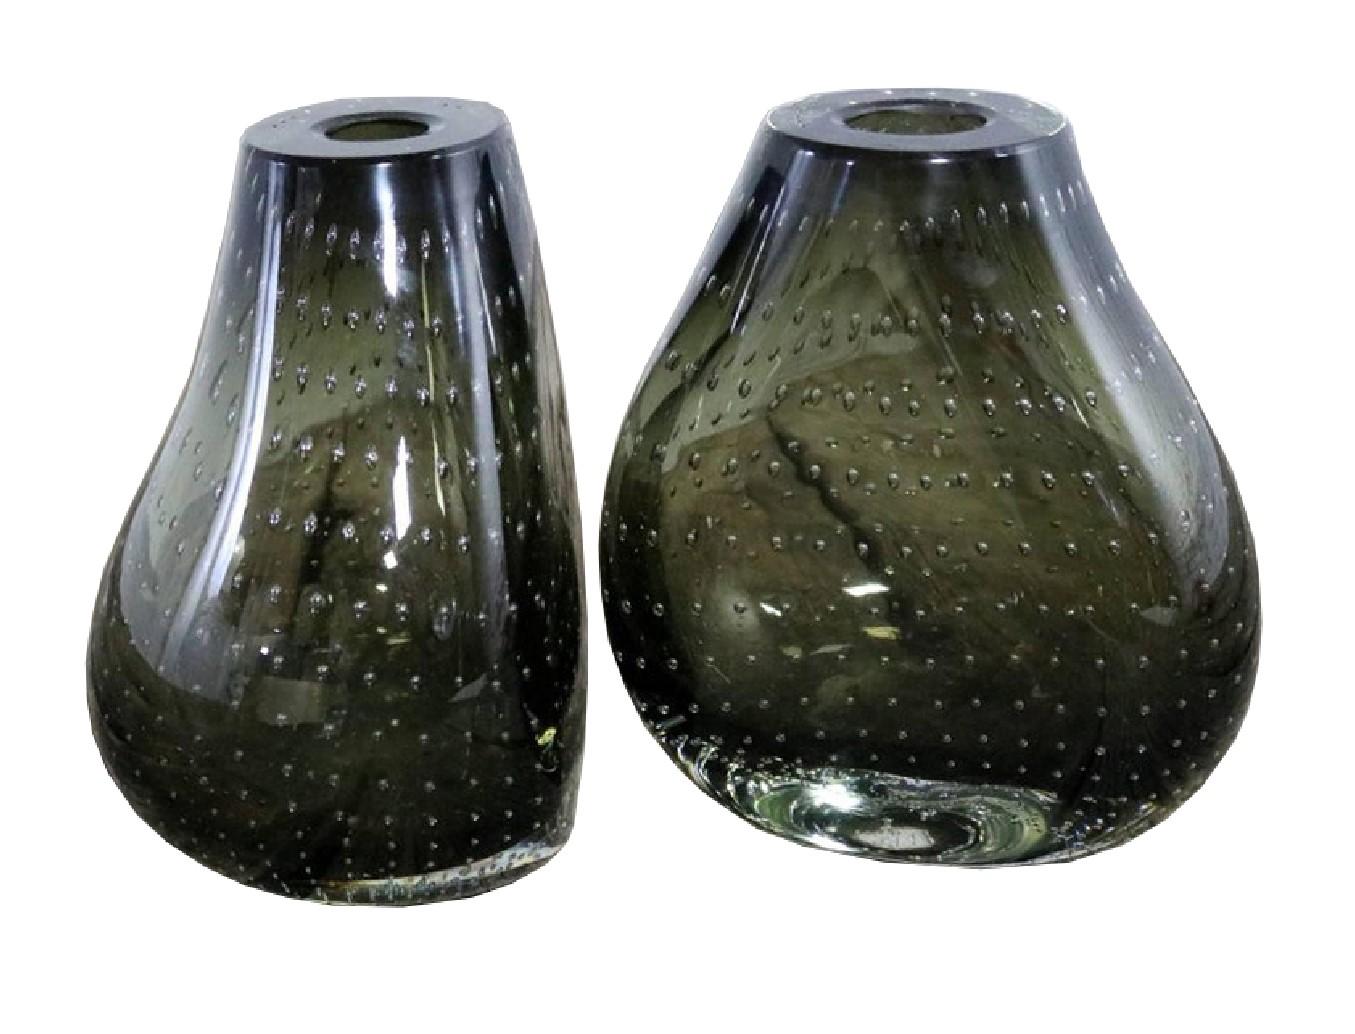 1950s pair of green art glass vase bookends with a beautiful bullicante pattern by Erickson Glass Works. These vase bookends have a bulbous shape with one flat side and feature Erickson’s trademark of controlled bubble or bullicante style

Property